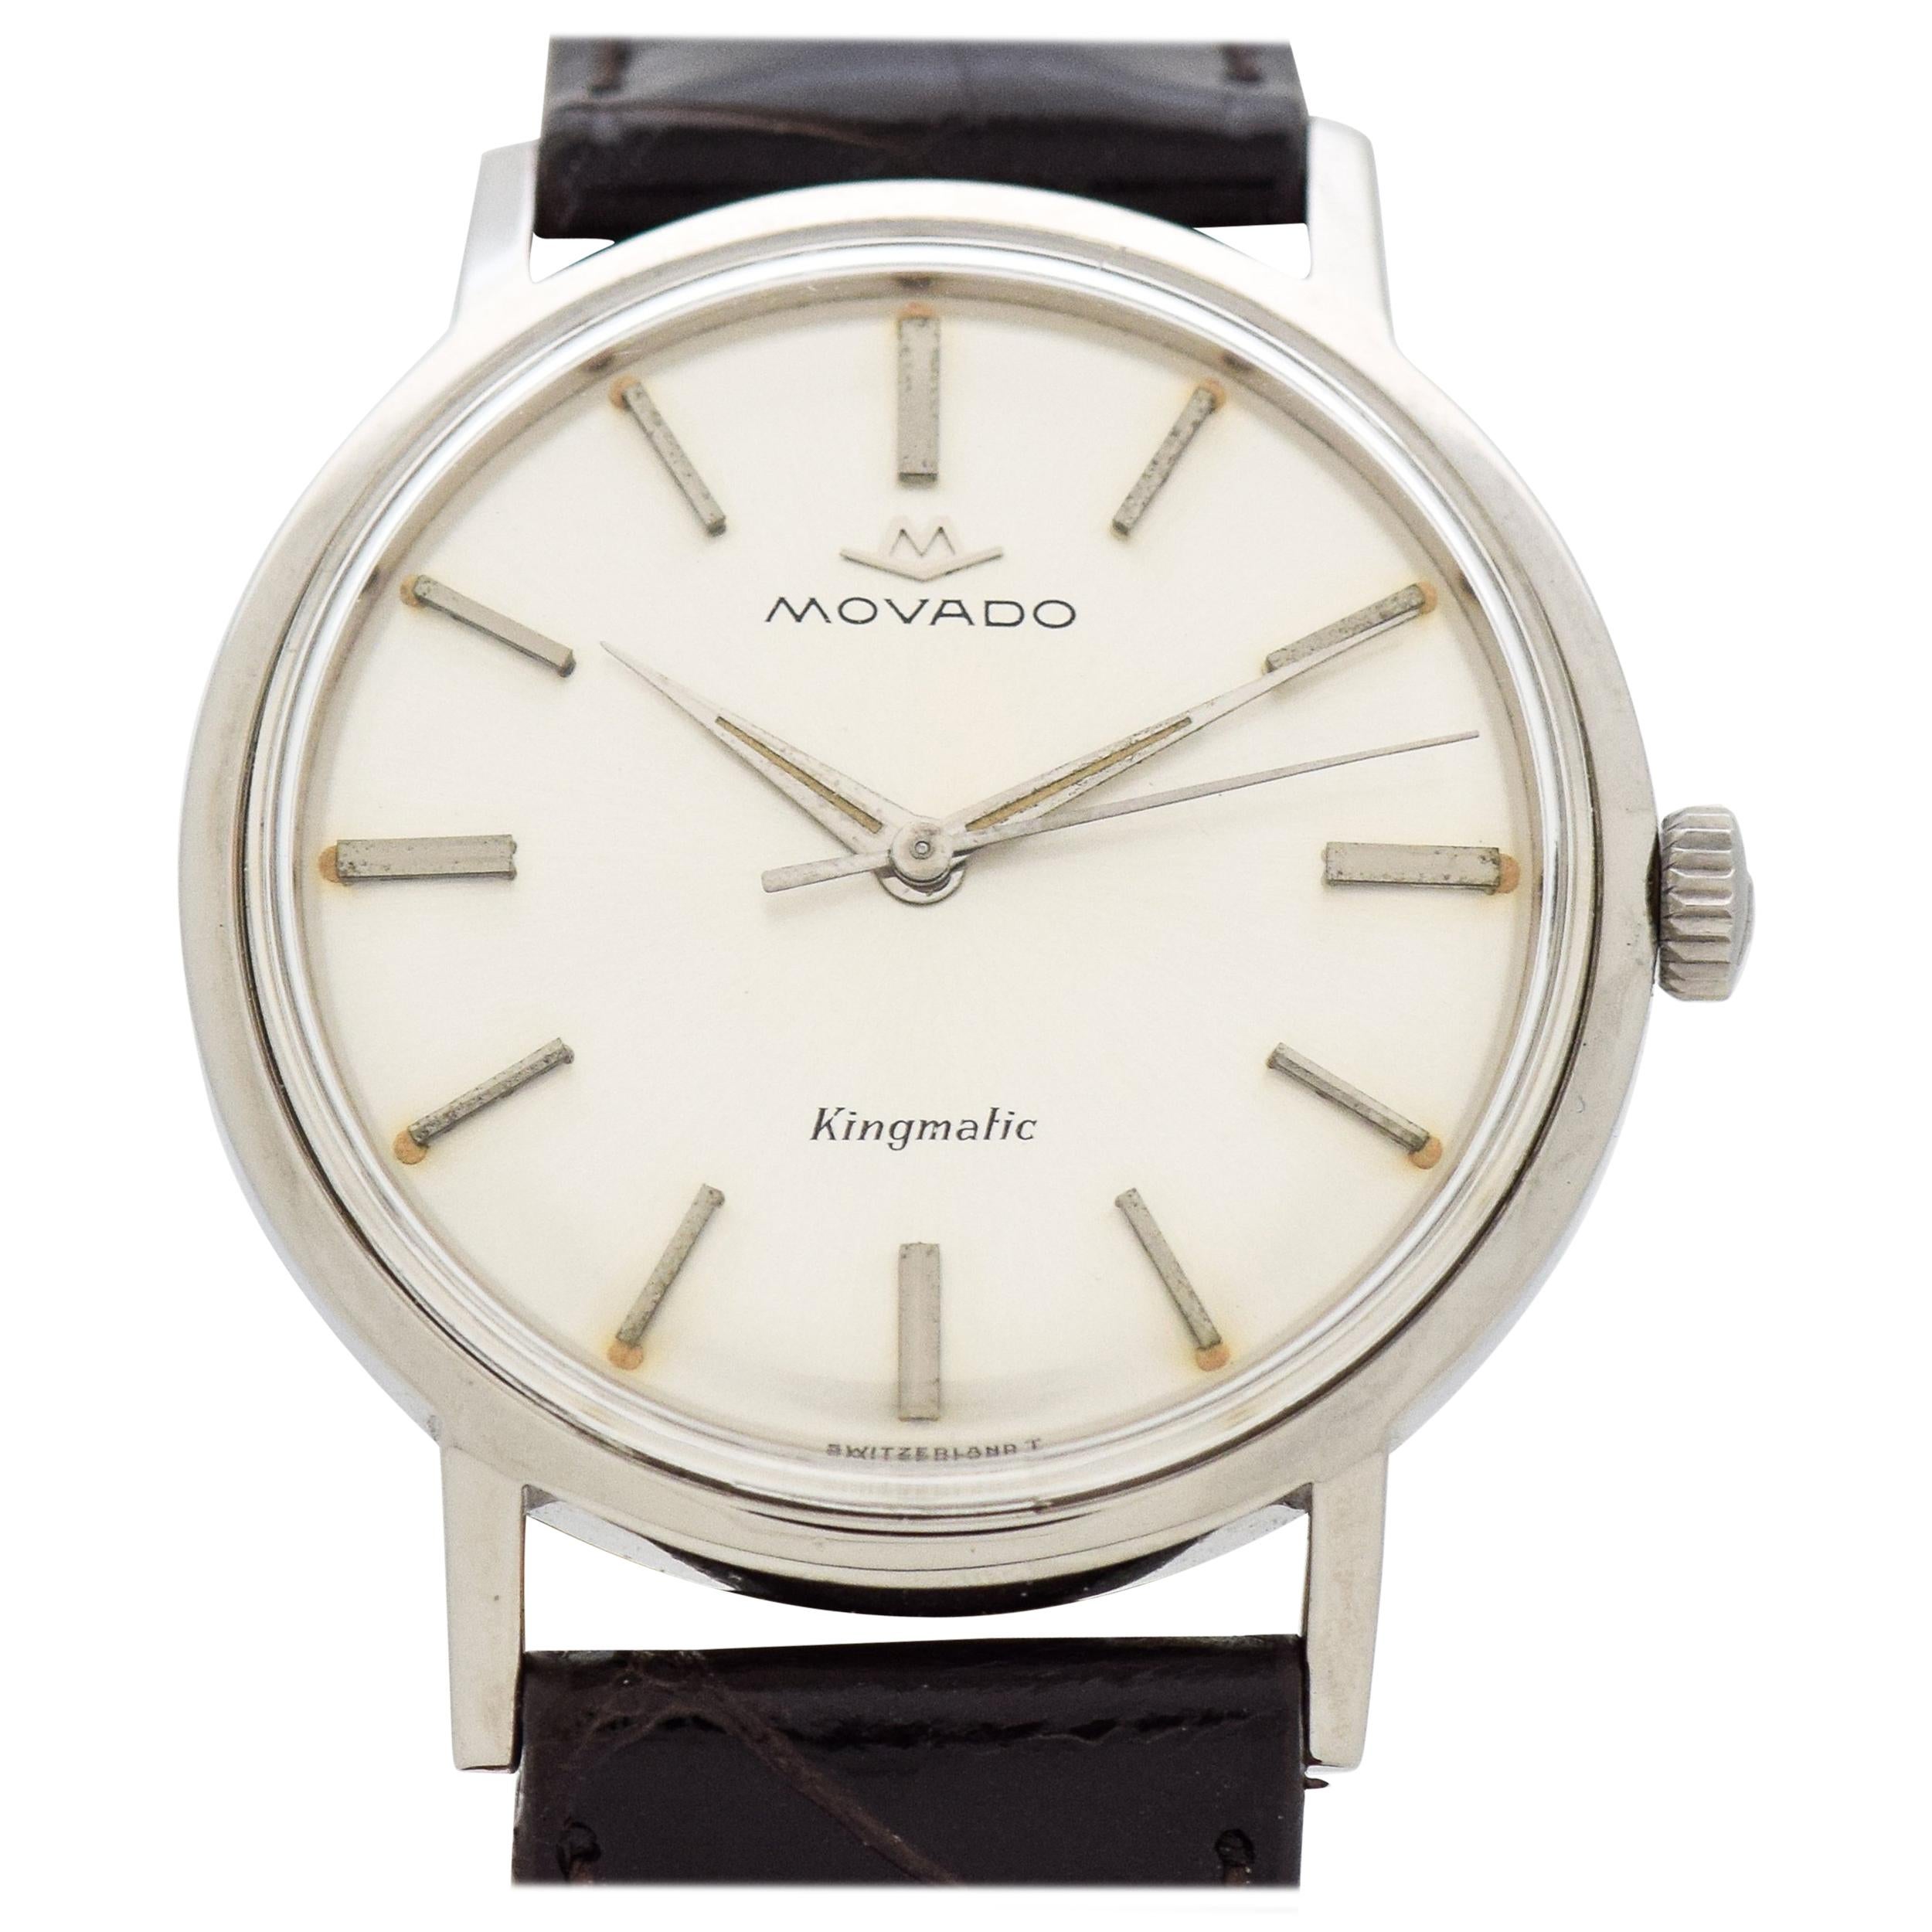 Vintage Movado Kingmatic Sub-Sea Stainless Steel Watch, 1960s For Sale